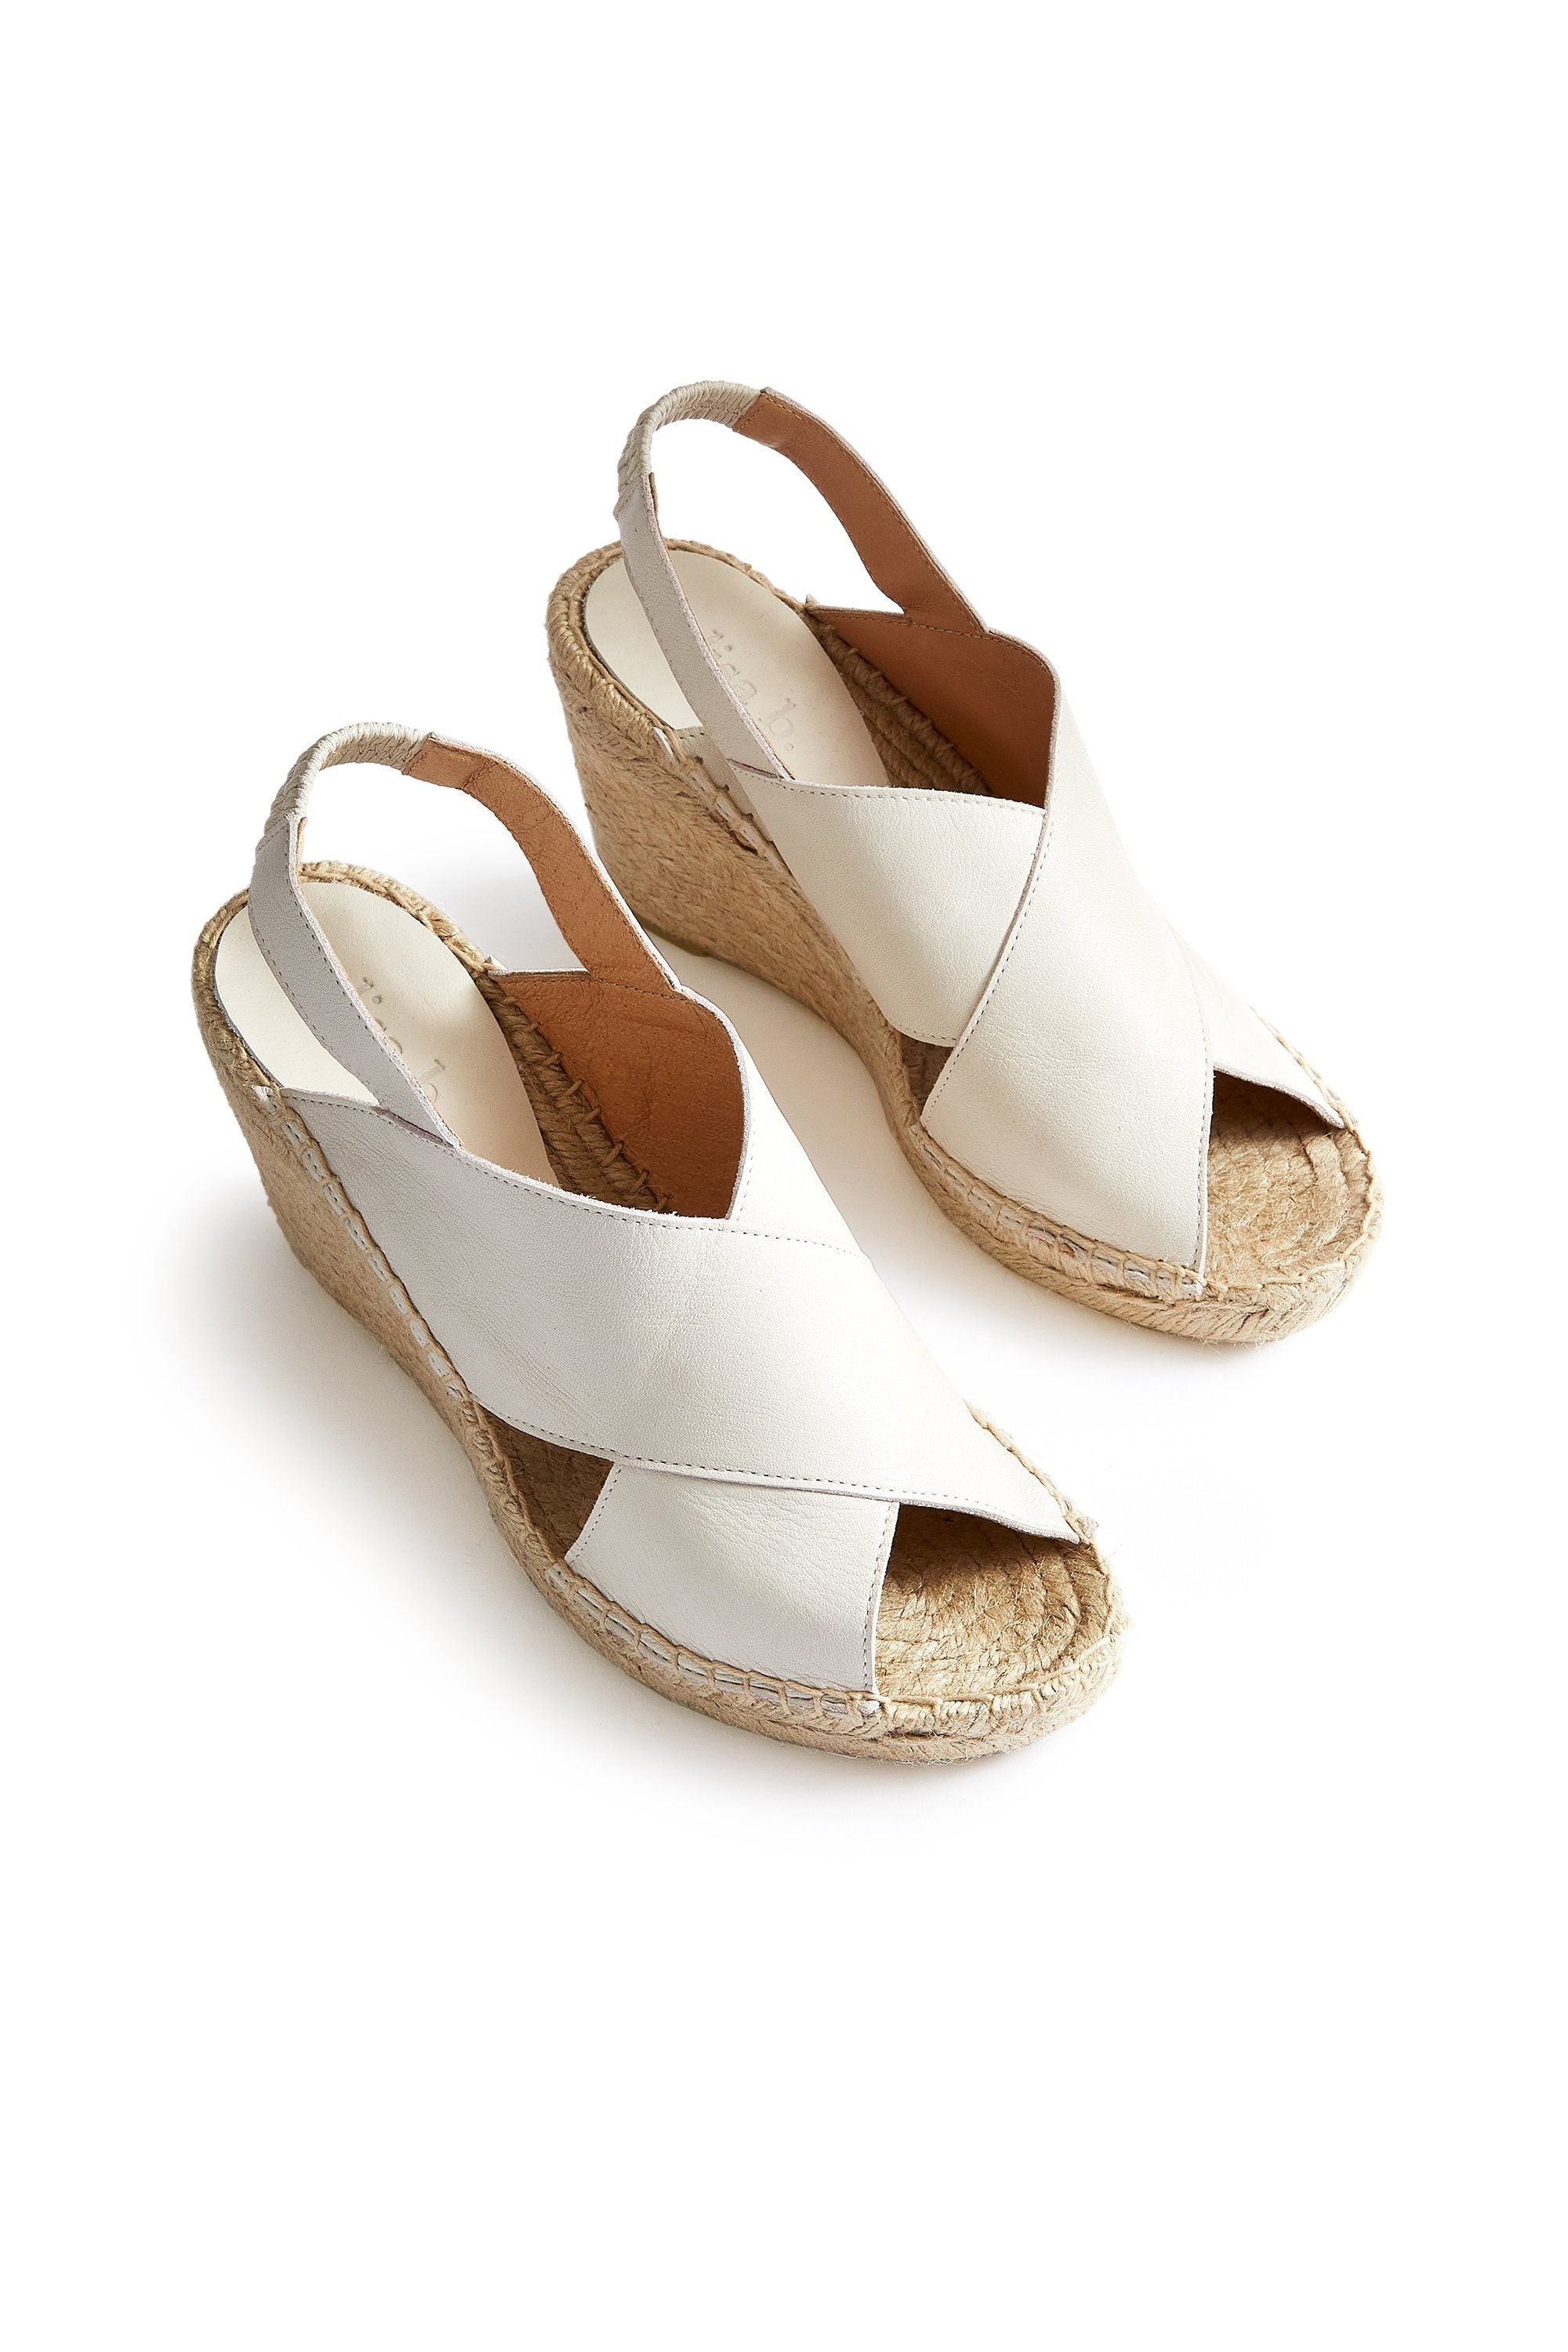 cross-over wedge espadrille in off white Espadrilles lisa b. off white 36 (US 5.5-6) 